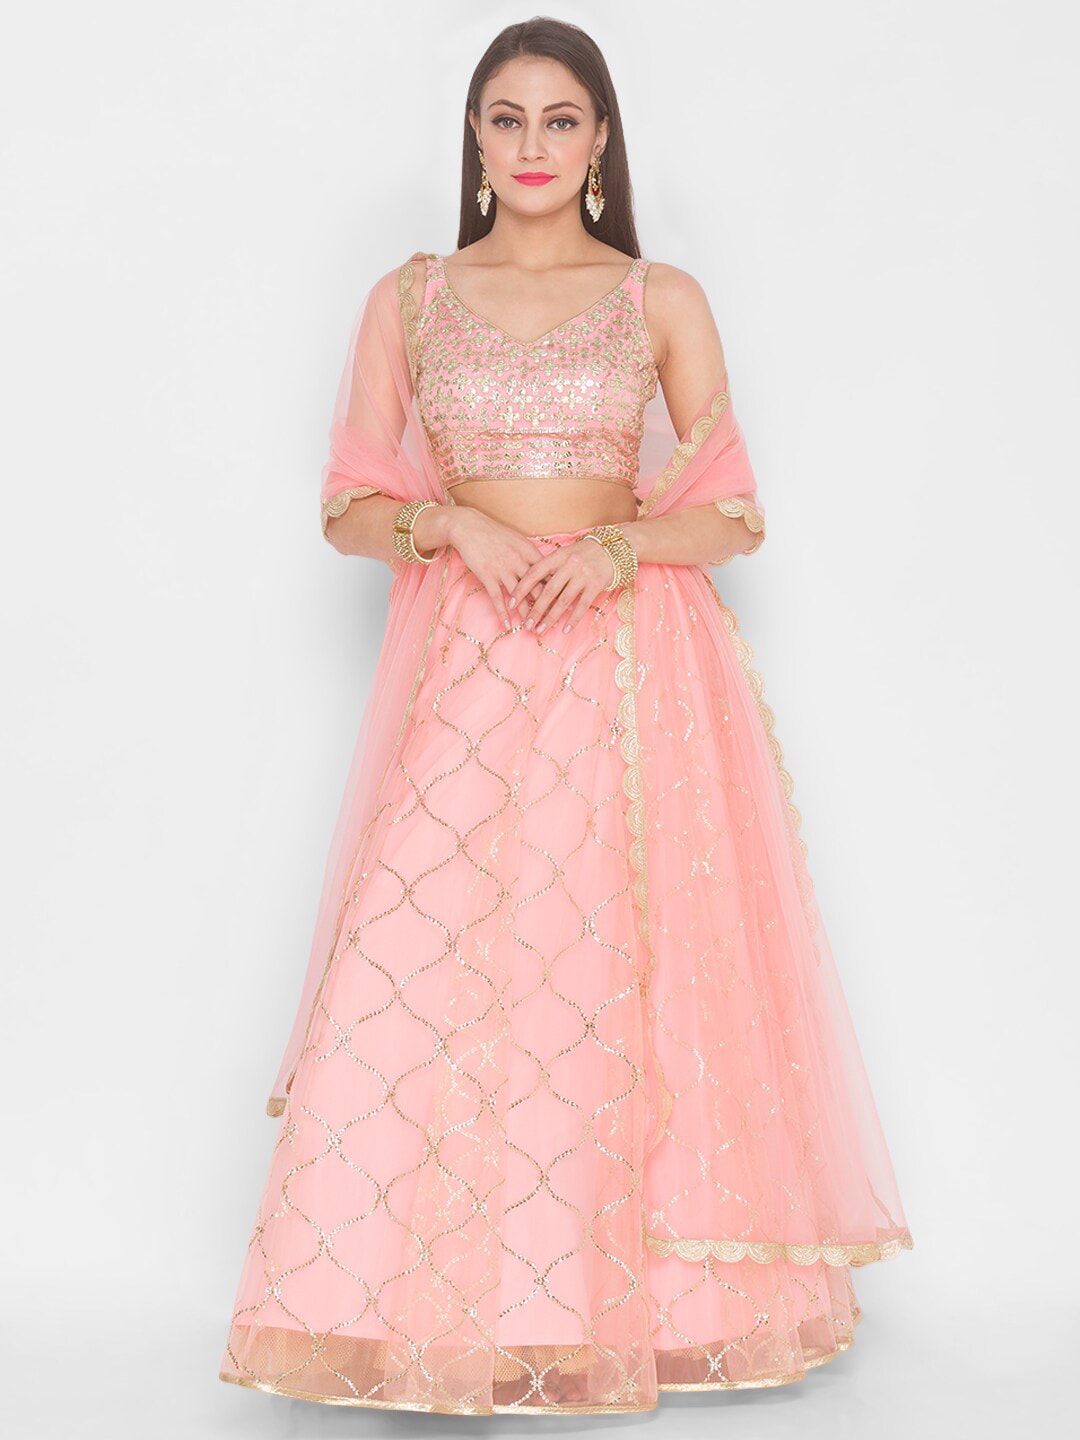 6Y COLLECTIVE Peach-Coloured & Gold-Toned Embroidered Sequinned Semi-Stitched Lehenga & Unstitched Blouse Price in India